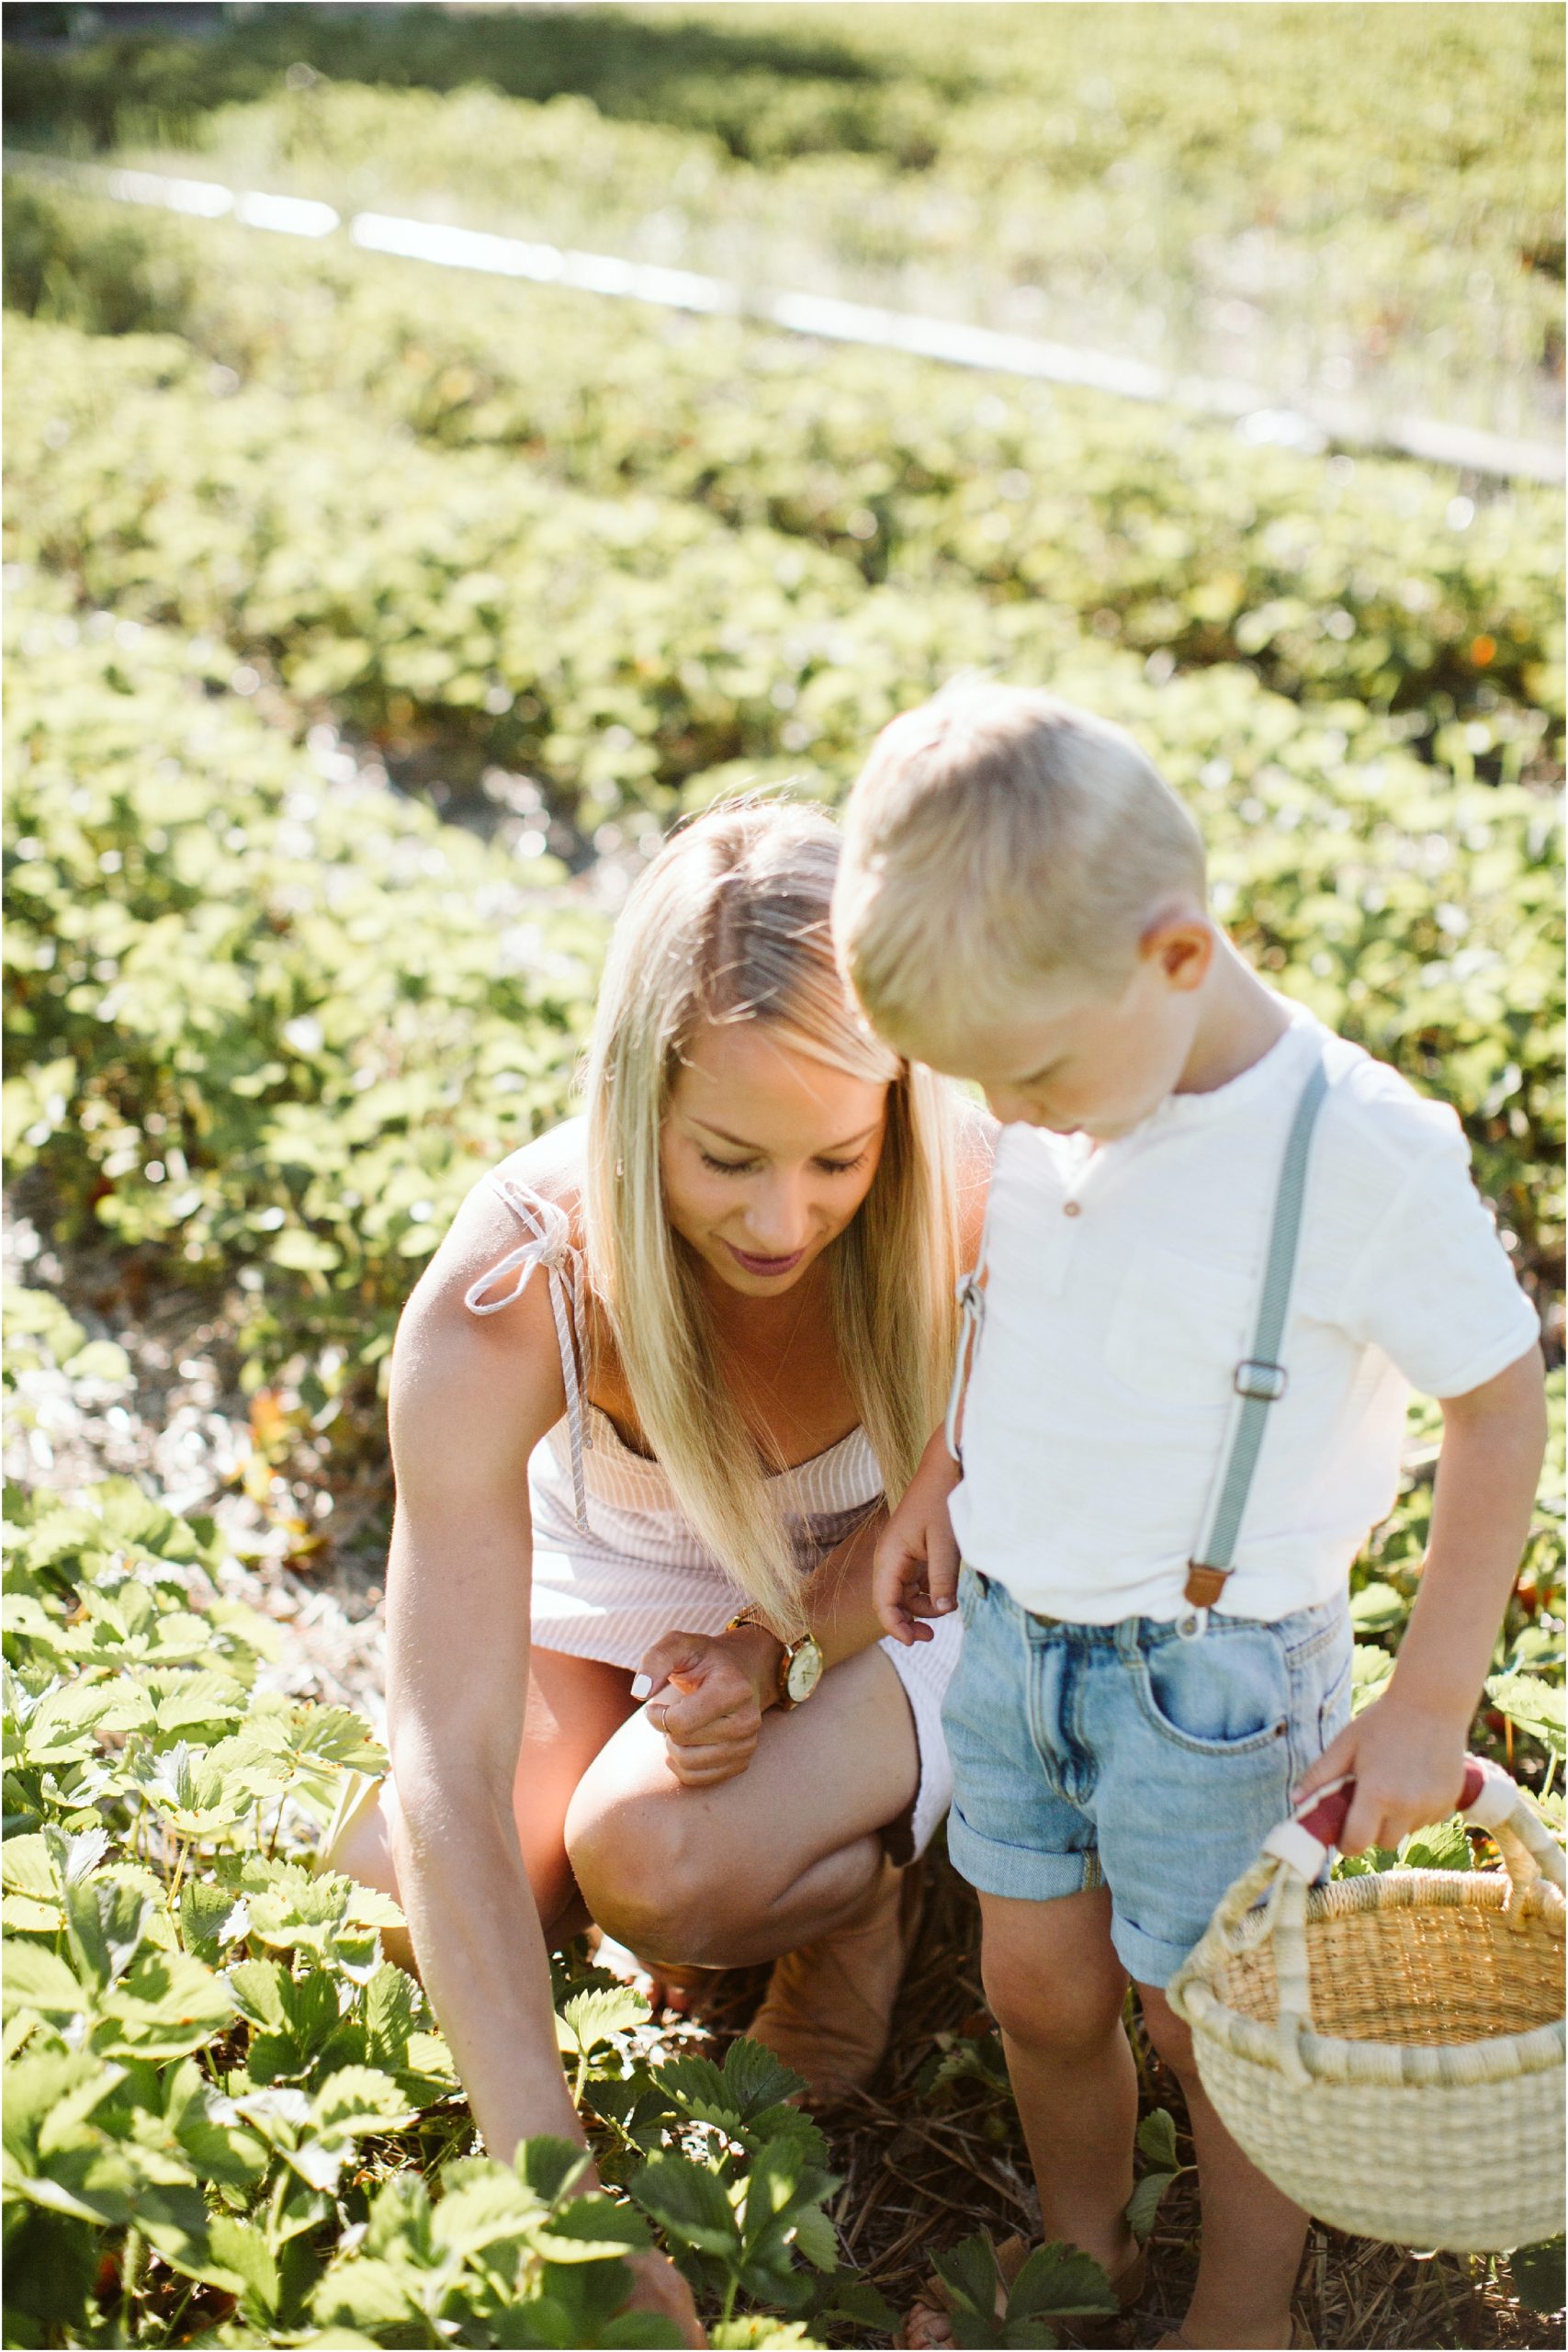 central wisconsin, stevens point, wausau, photographer, photography, lifestyle, family, strawberry patch, outdoors, natural, alysa rene photography